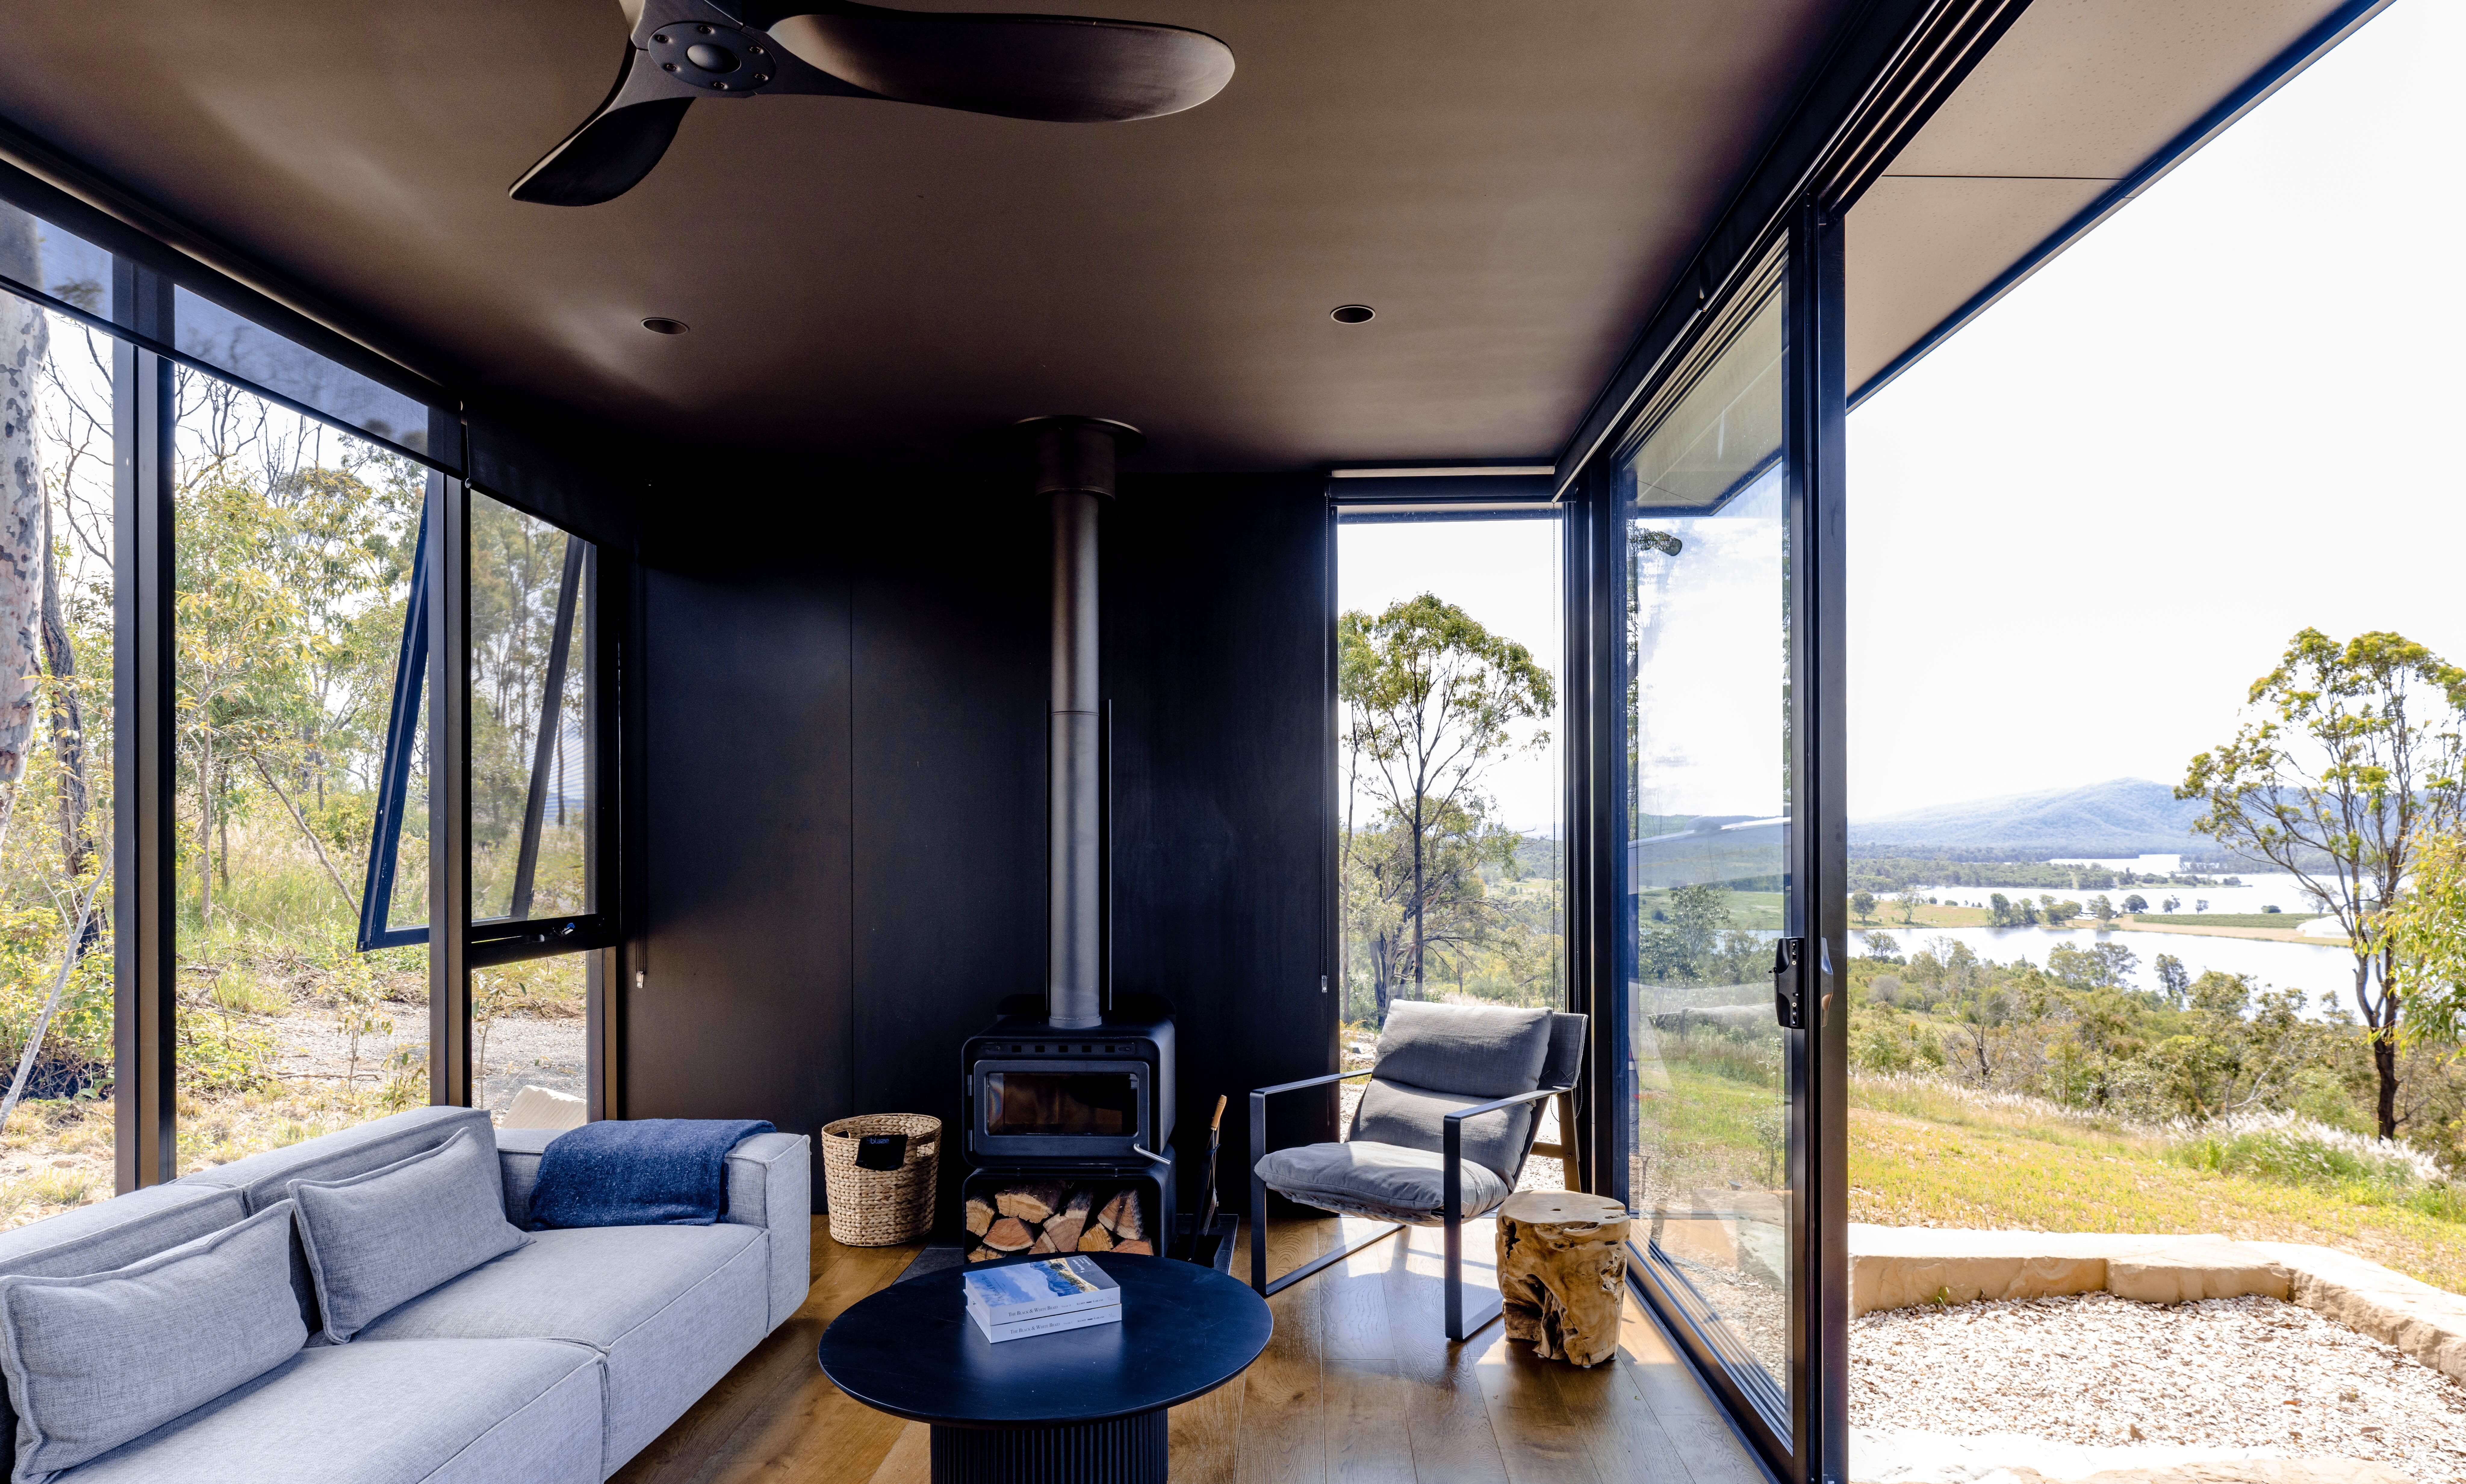 The interior of a WanderPod accommodation, looking out onto native Australian bushland and tranquil Lake Wyralong